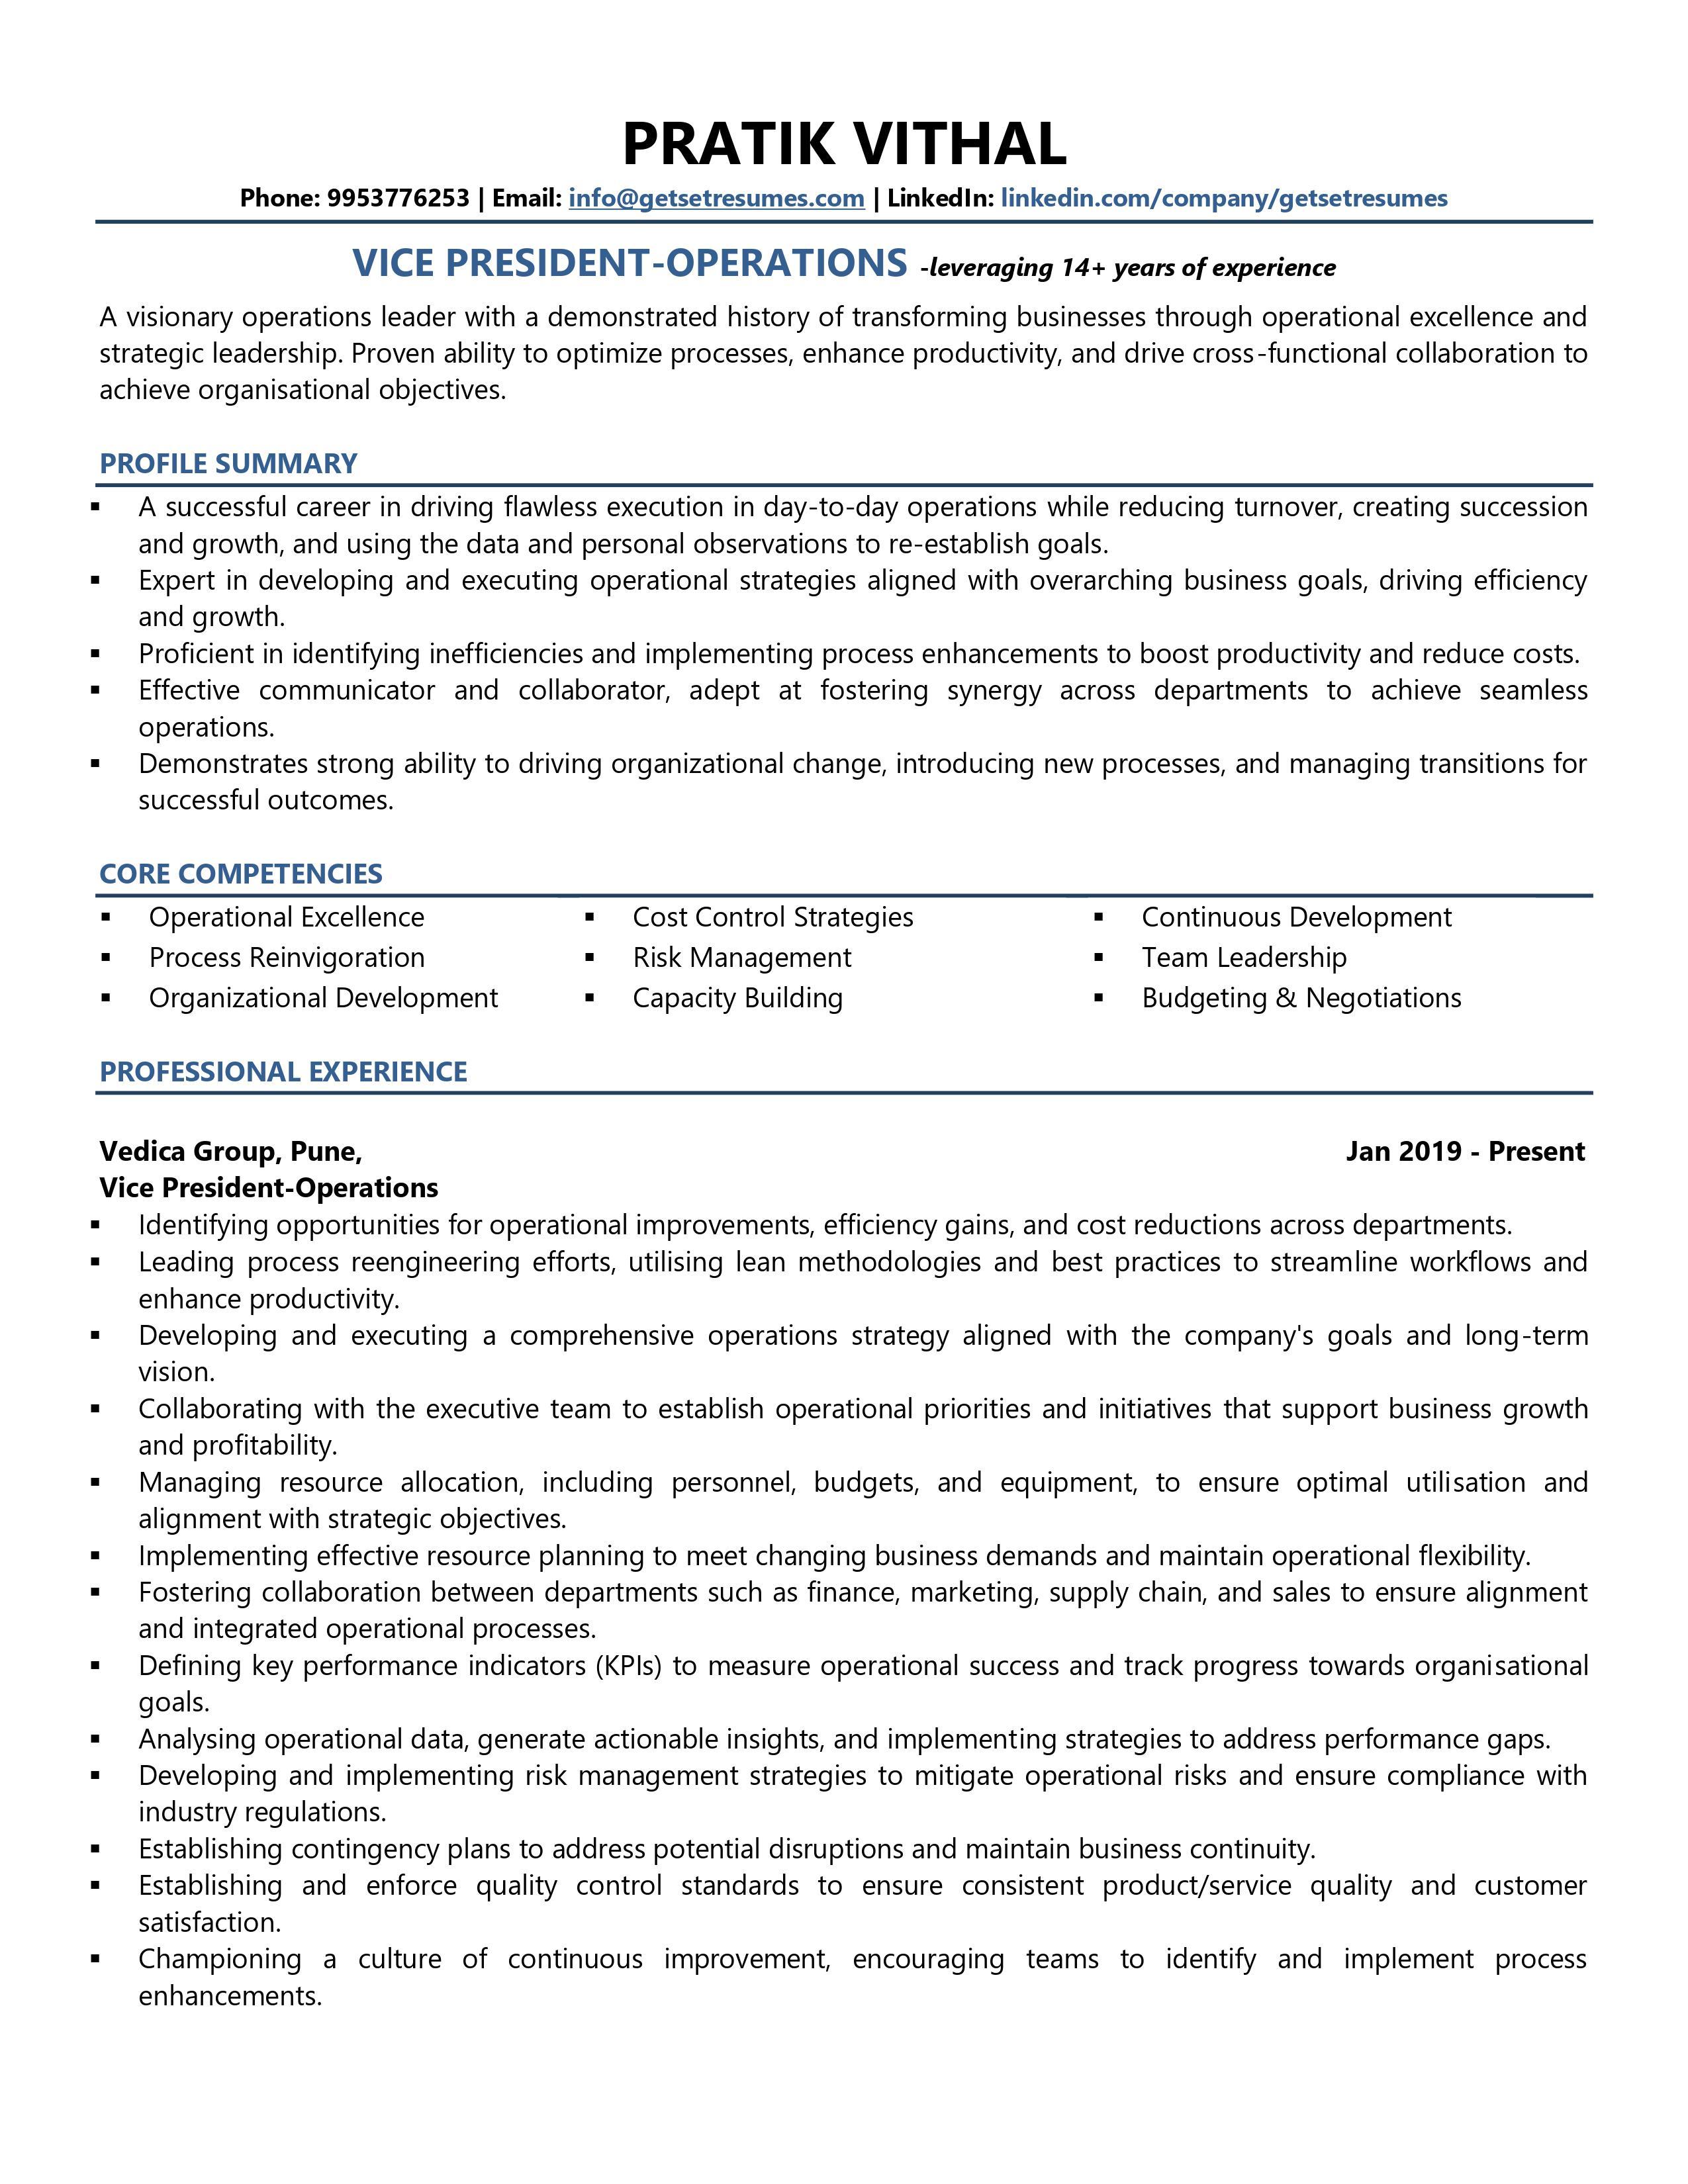 VP-Operations - Resume Example & Template